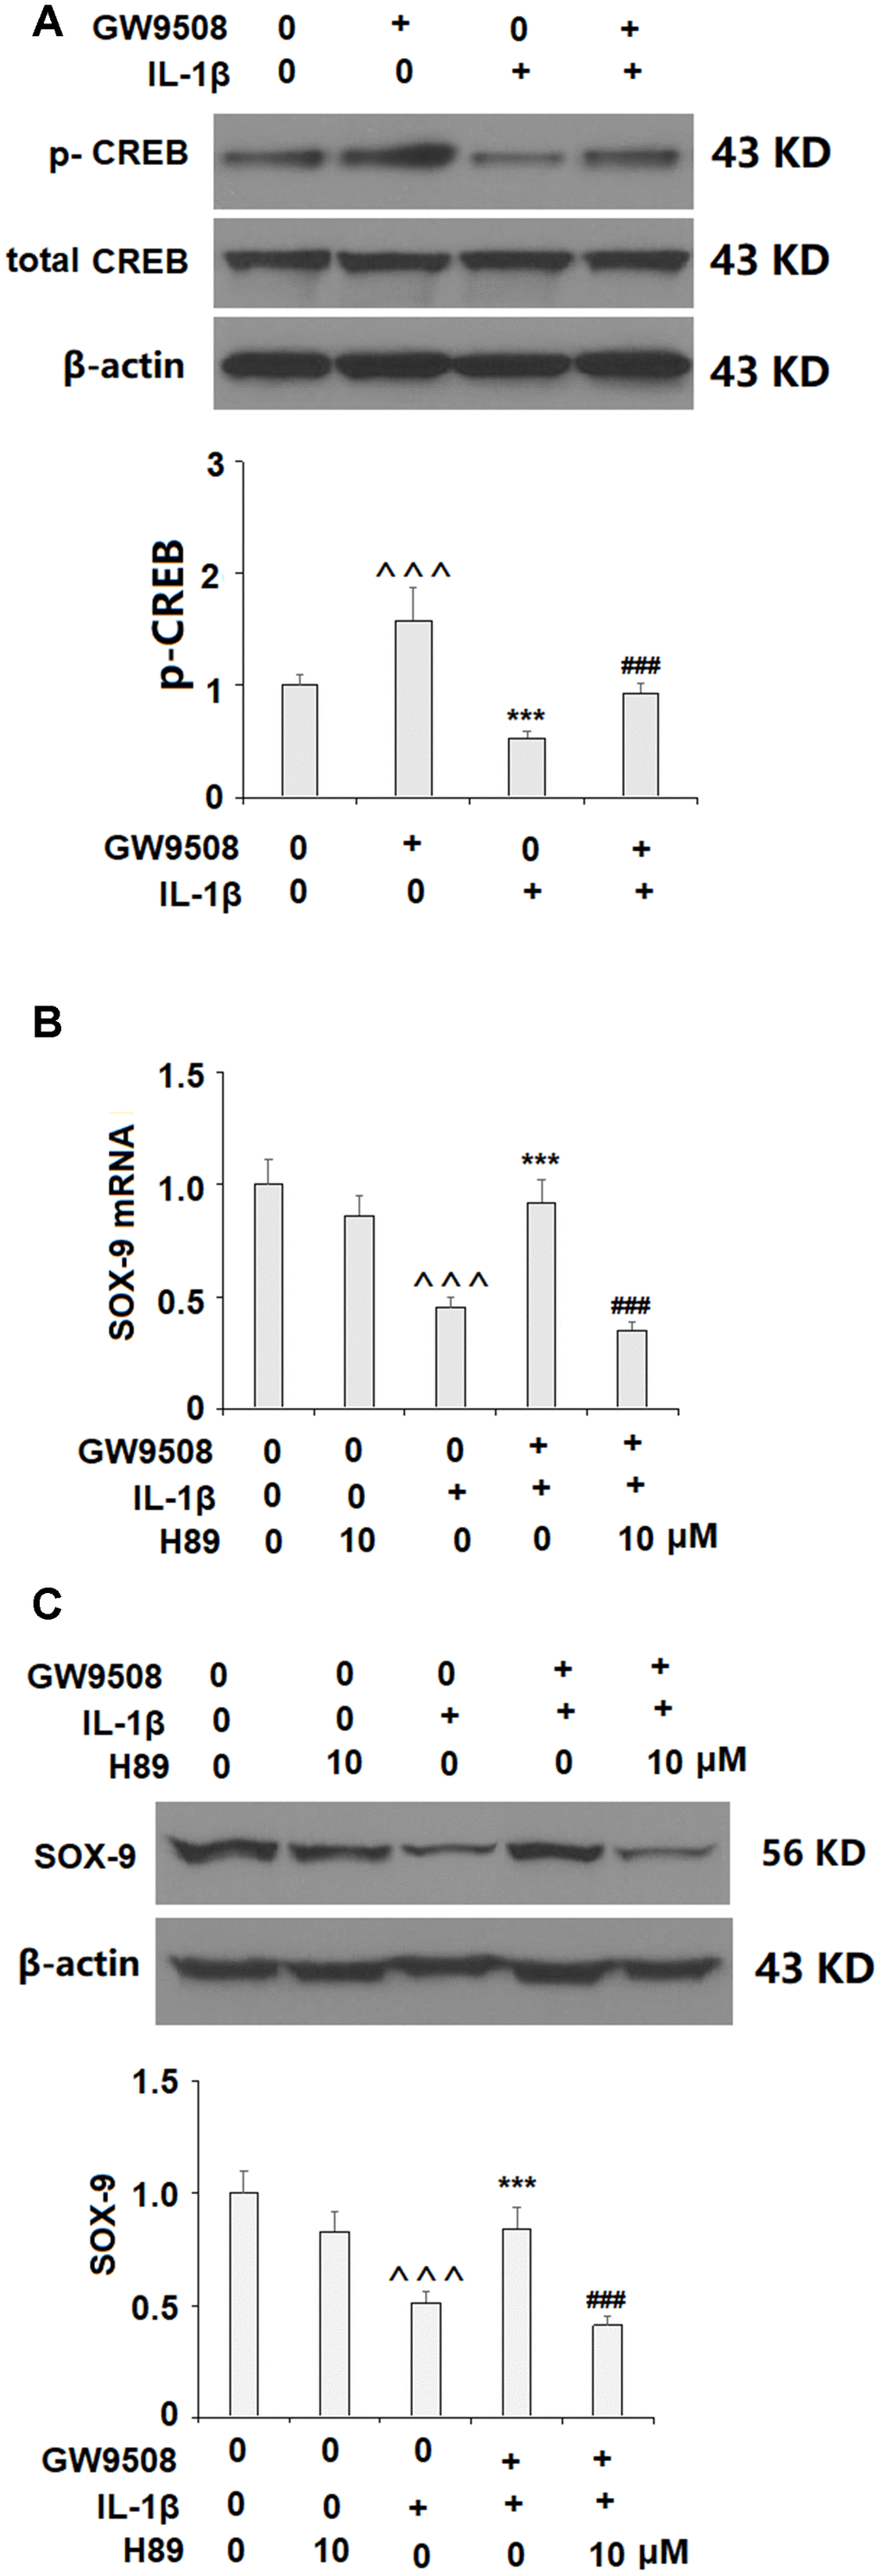 The effects of GW9508 in increasing SOX-9 expression are mediated by CREB. (A). Cells were treated with IL-1β (10 ng/ml) with or without GW9508 (50 μM) for 24 h. Phosphorylated and total levels of CREB were measured by western blot analysis (^^^, ***, PB, C). Blockage of CREB with H89 ameliorated the effects of GW9508 in SOX-9 expression. Cells were treated with IL-1β (10 ng/ml) with or without GW9508 (50 μM) or H89 (10μM). mRNA and protein of SOX-9 were measured (^^^, P